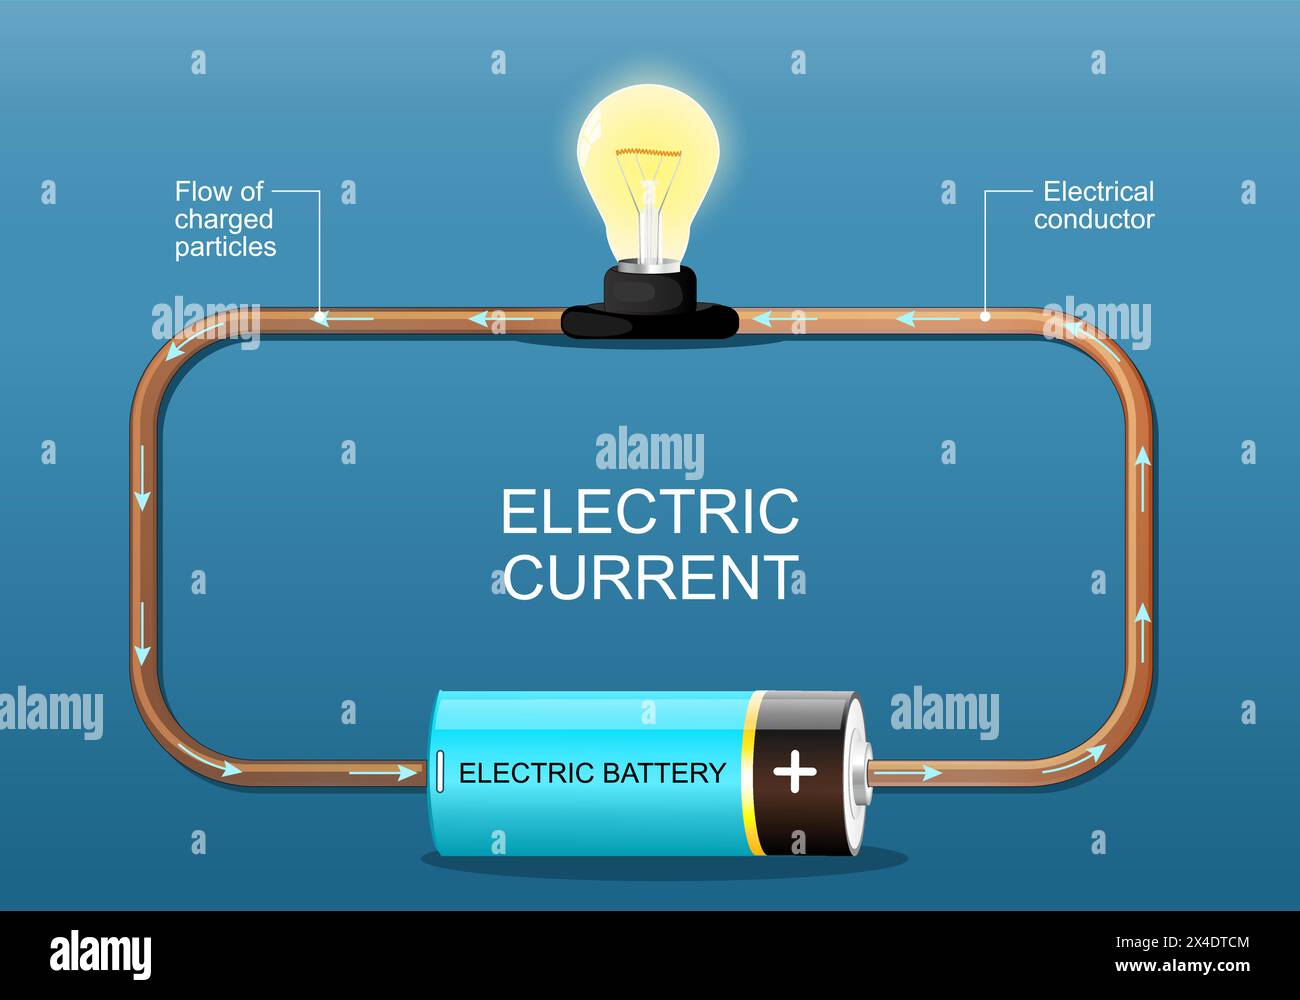 Electric current. Electrons flow. Simple electric circuit. Electrical network with light bulb, wire and battery. Vector poster. Isometric Flat illustr Stock Vector